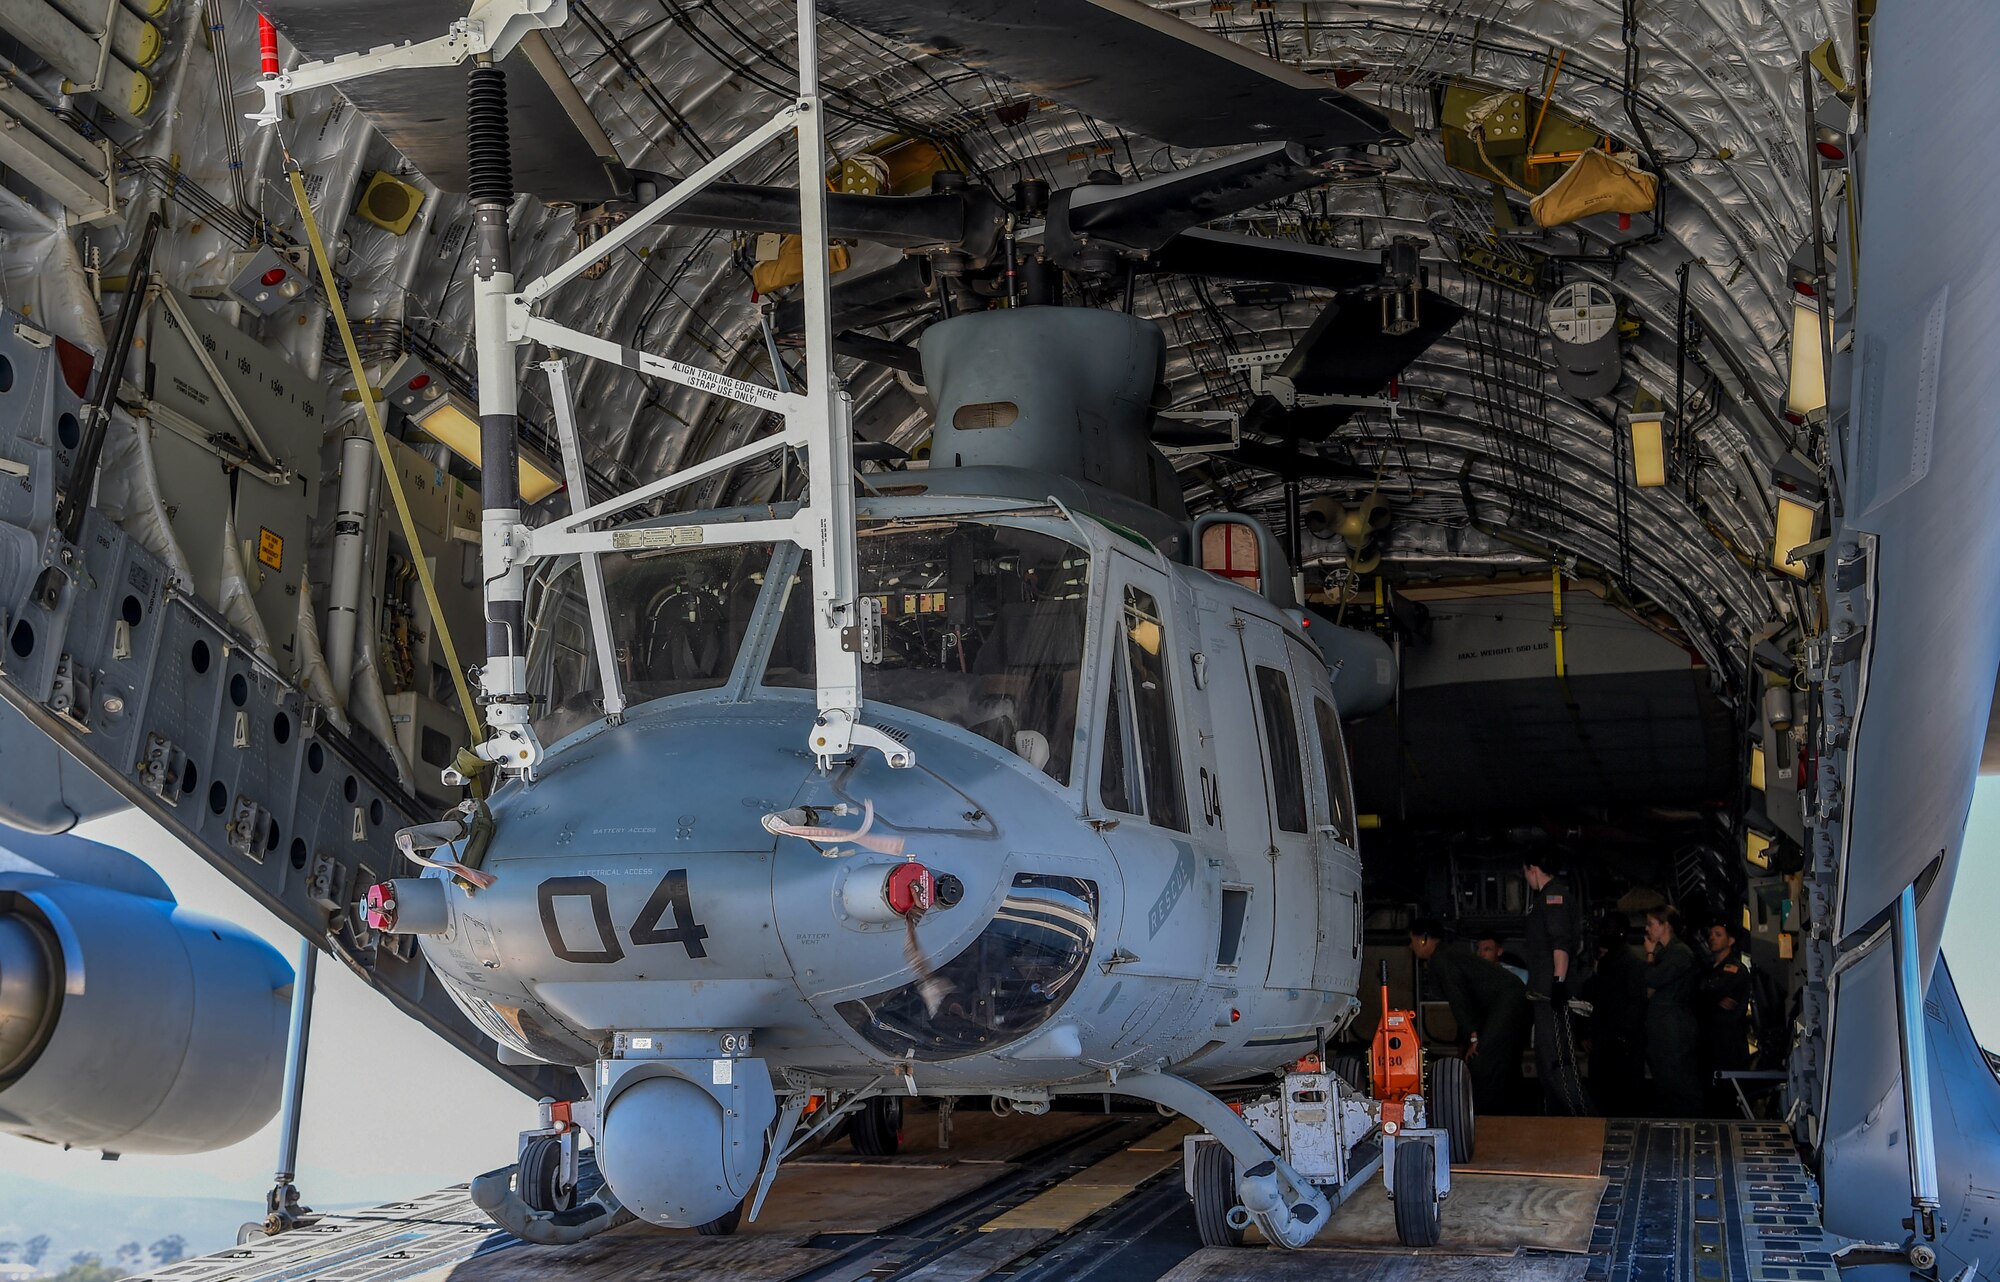 A U.S. Marine Corps UH-1Y Venom sits inside a U.S. Air Force C-17 Globemaster III at Camp Pendleton, Calif., Sept 8, 2018. Airmen from the 4th Airlift Squadron transported the helicopter to the Czech Republic so both aircraft could participate in the NATO Days Air Show held there. (U.S. Air Force photo by Senior Airman Tryphena Mayhugh)